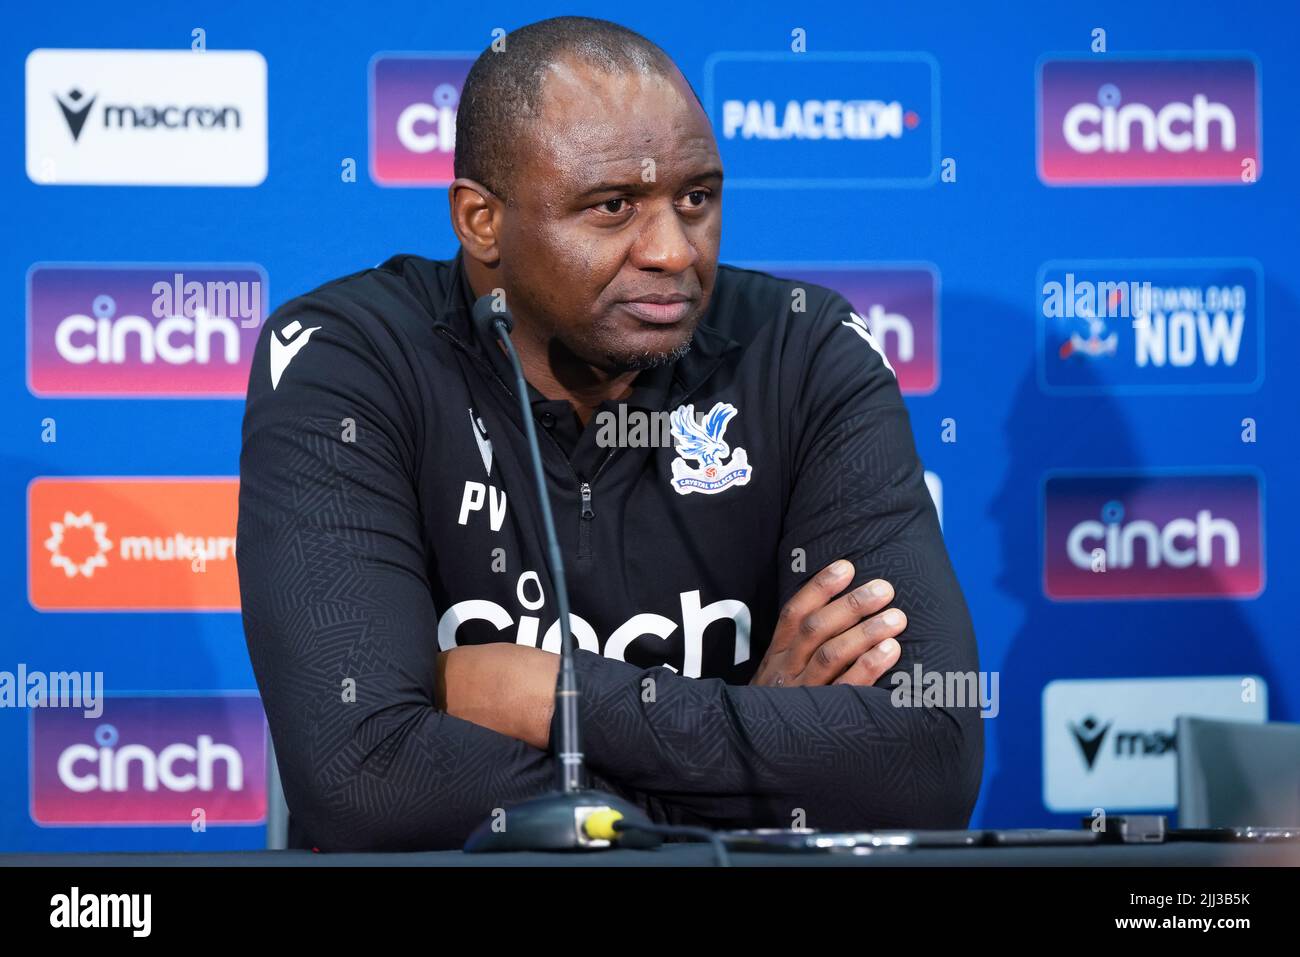 Perth, Australia, 22 July, 2022. Crystal Pallace Manager, Patrick Vieira, during post-game press conference following the ICON Festival of International Football match between Crystal Palace and Leeds United at Optus Stadium on July 22, 2022 in Perth, Australia. Credit: Graham Conaty/Speed Media/Alamy Live News Stock Photo